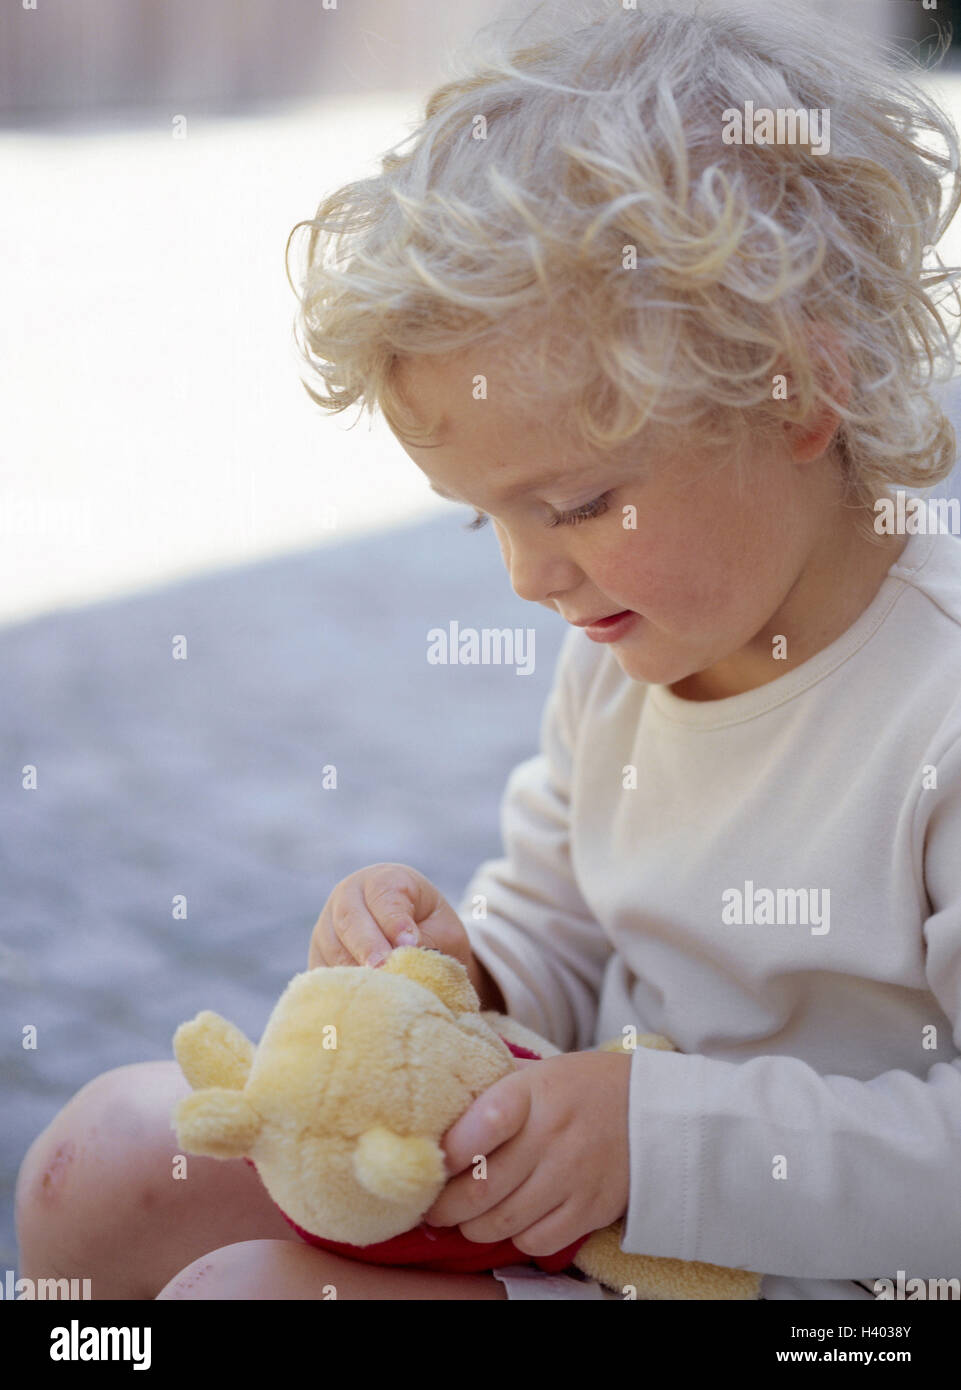 Boy, happy, teddy bear, play, portrait, side view, child portrait, child, infant, 3 - 5 years, blond, curls, wavy, activity, leisure time, childhood, soft animal, soft toy, Teddy, entertainment, friend, friendship, outside Stock Photo